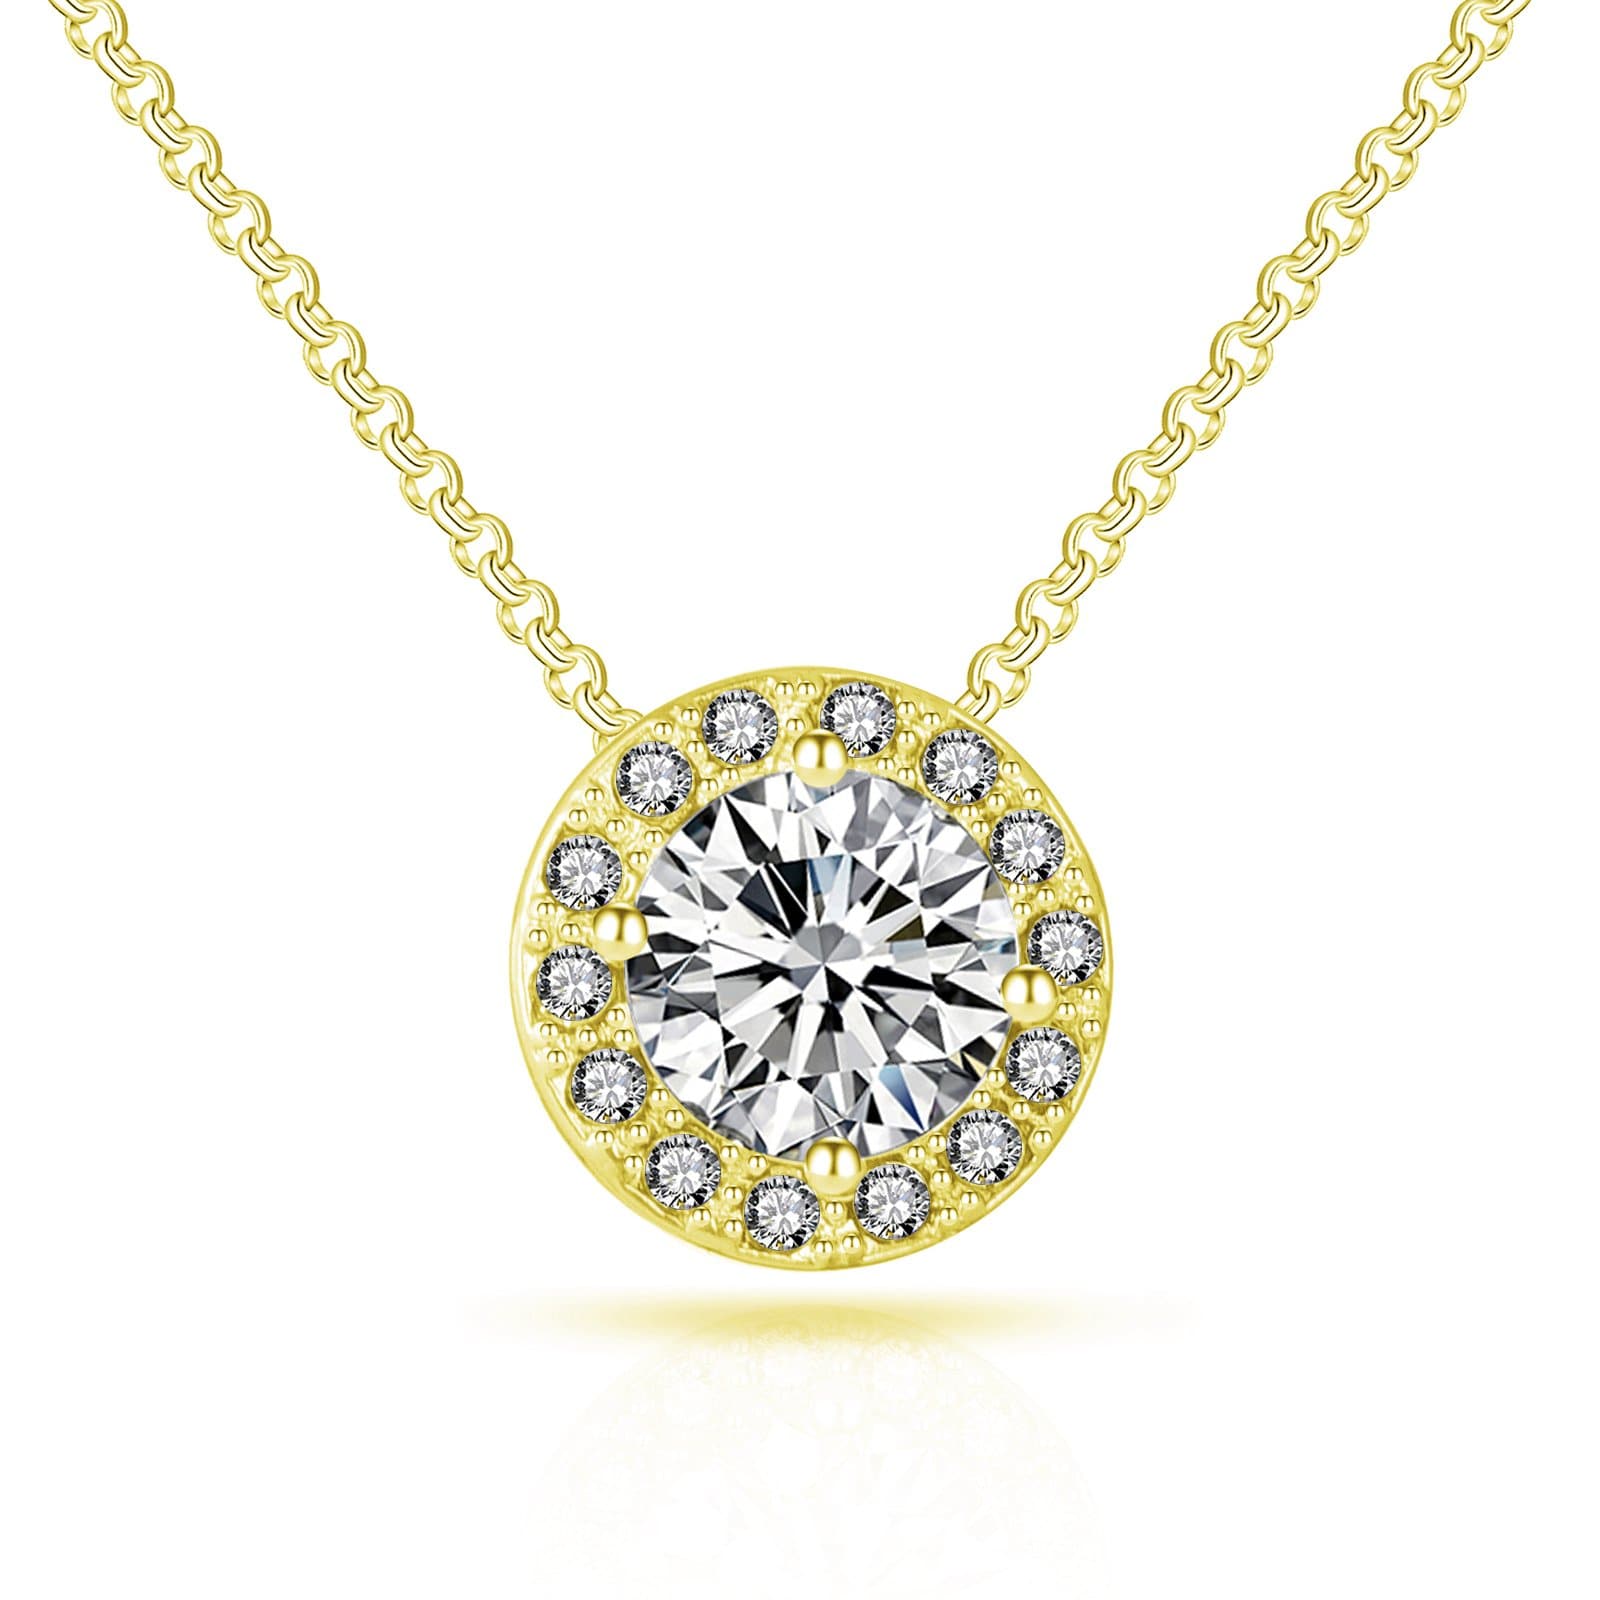 Gold Plated Halo Necklace Created with Zircondia® Crystals by Philip Jones Jewellery